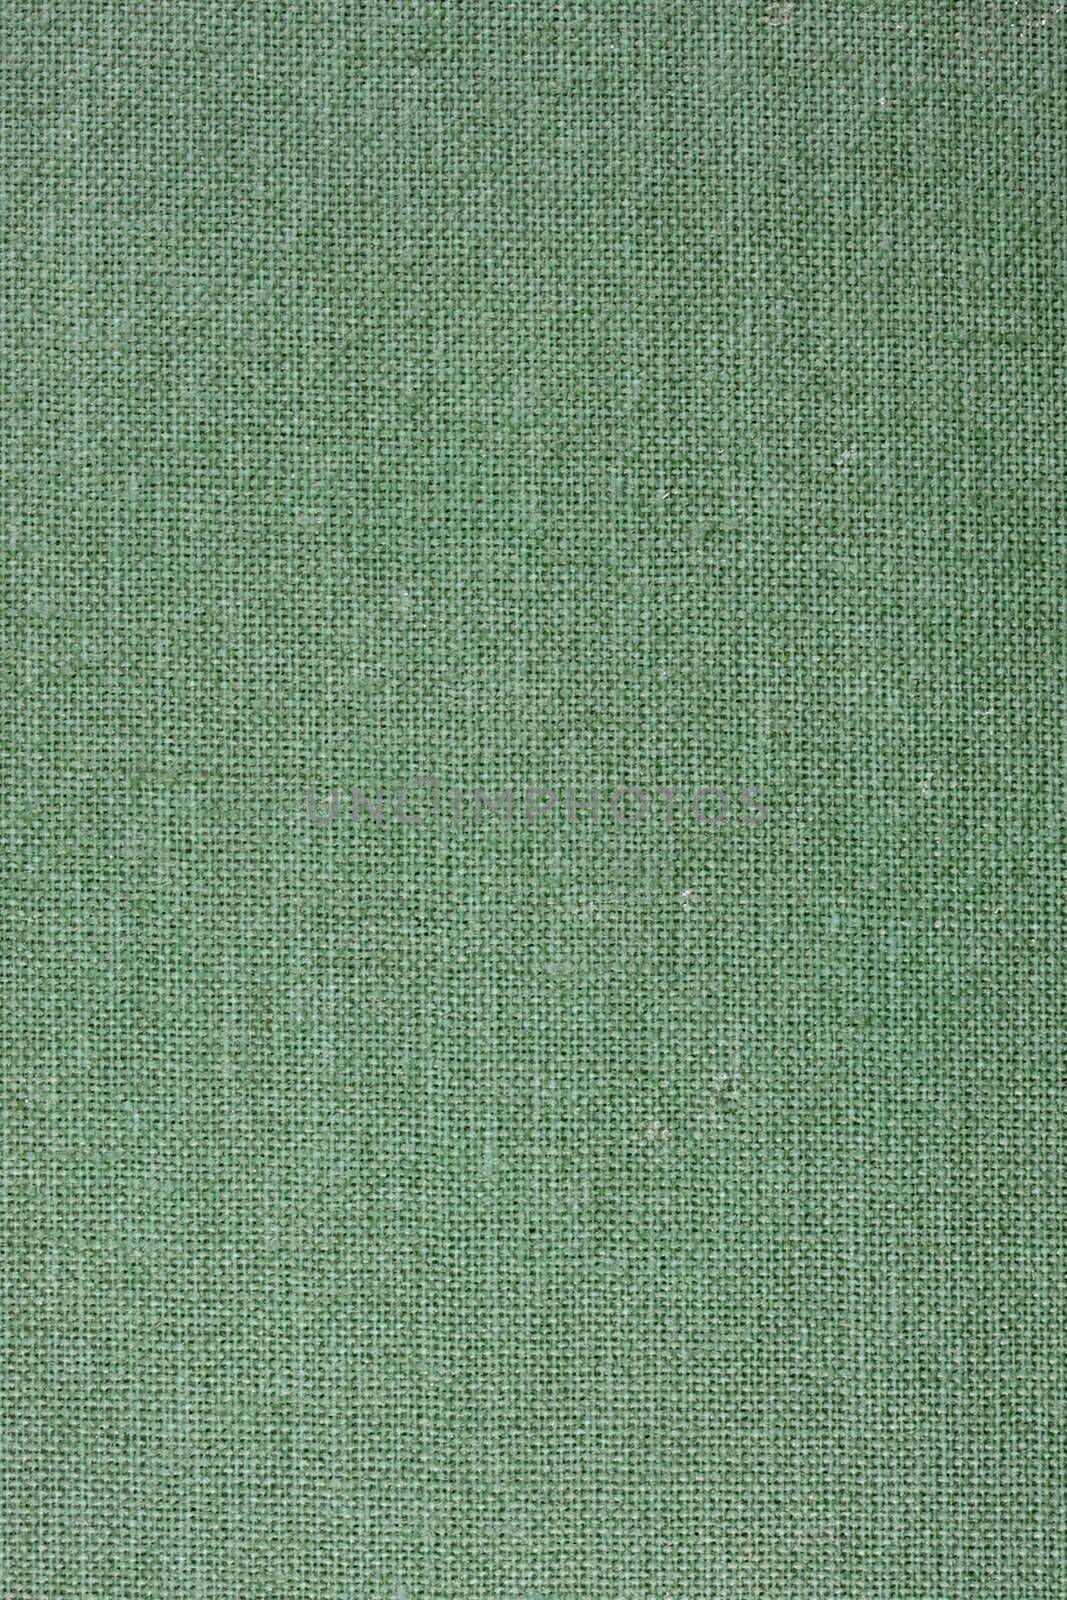 green textile background from a vintage 1960s book cover